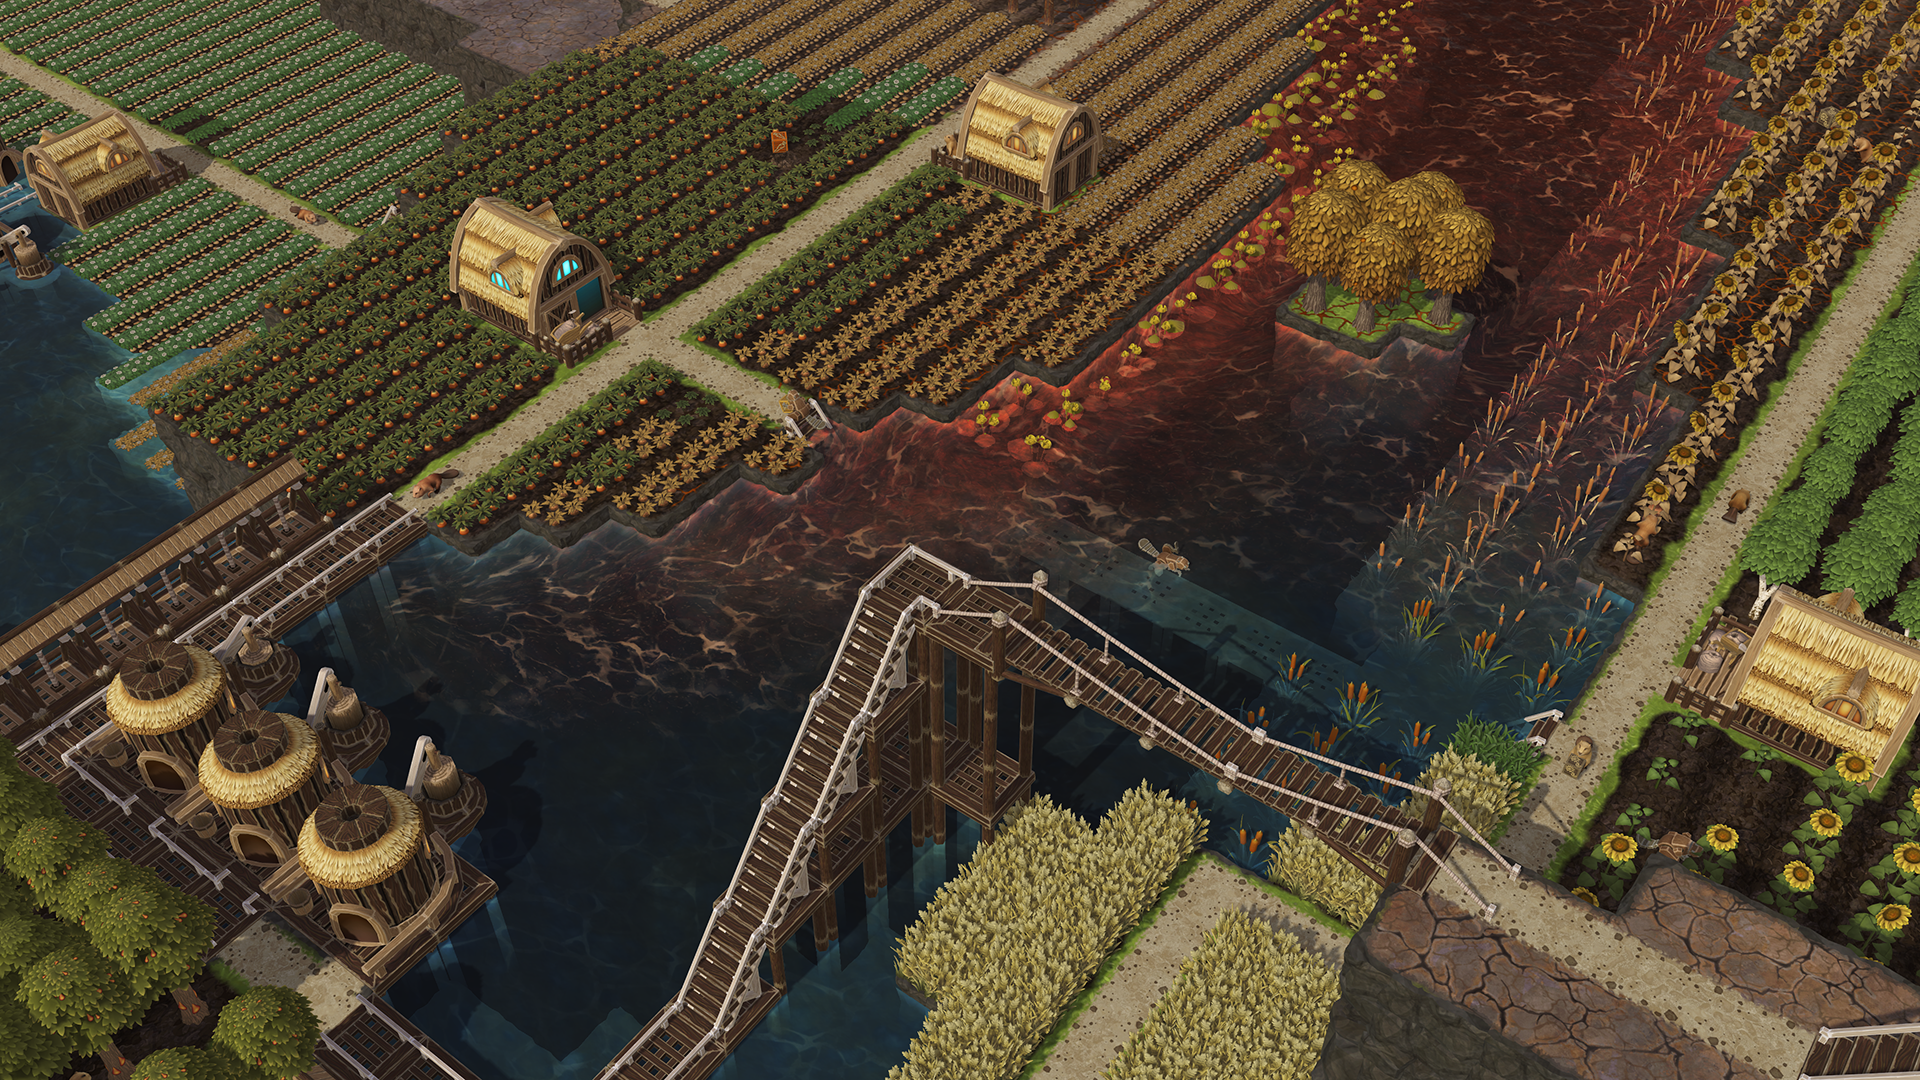 Everyone's favorite post-apocalypse beaver city builder now has horrible, polluted water